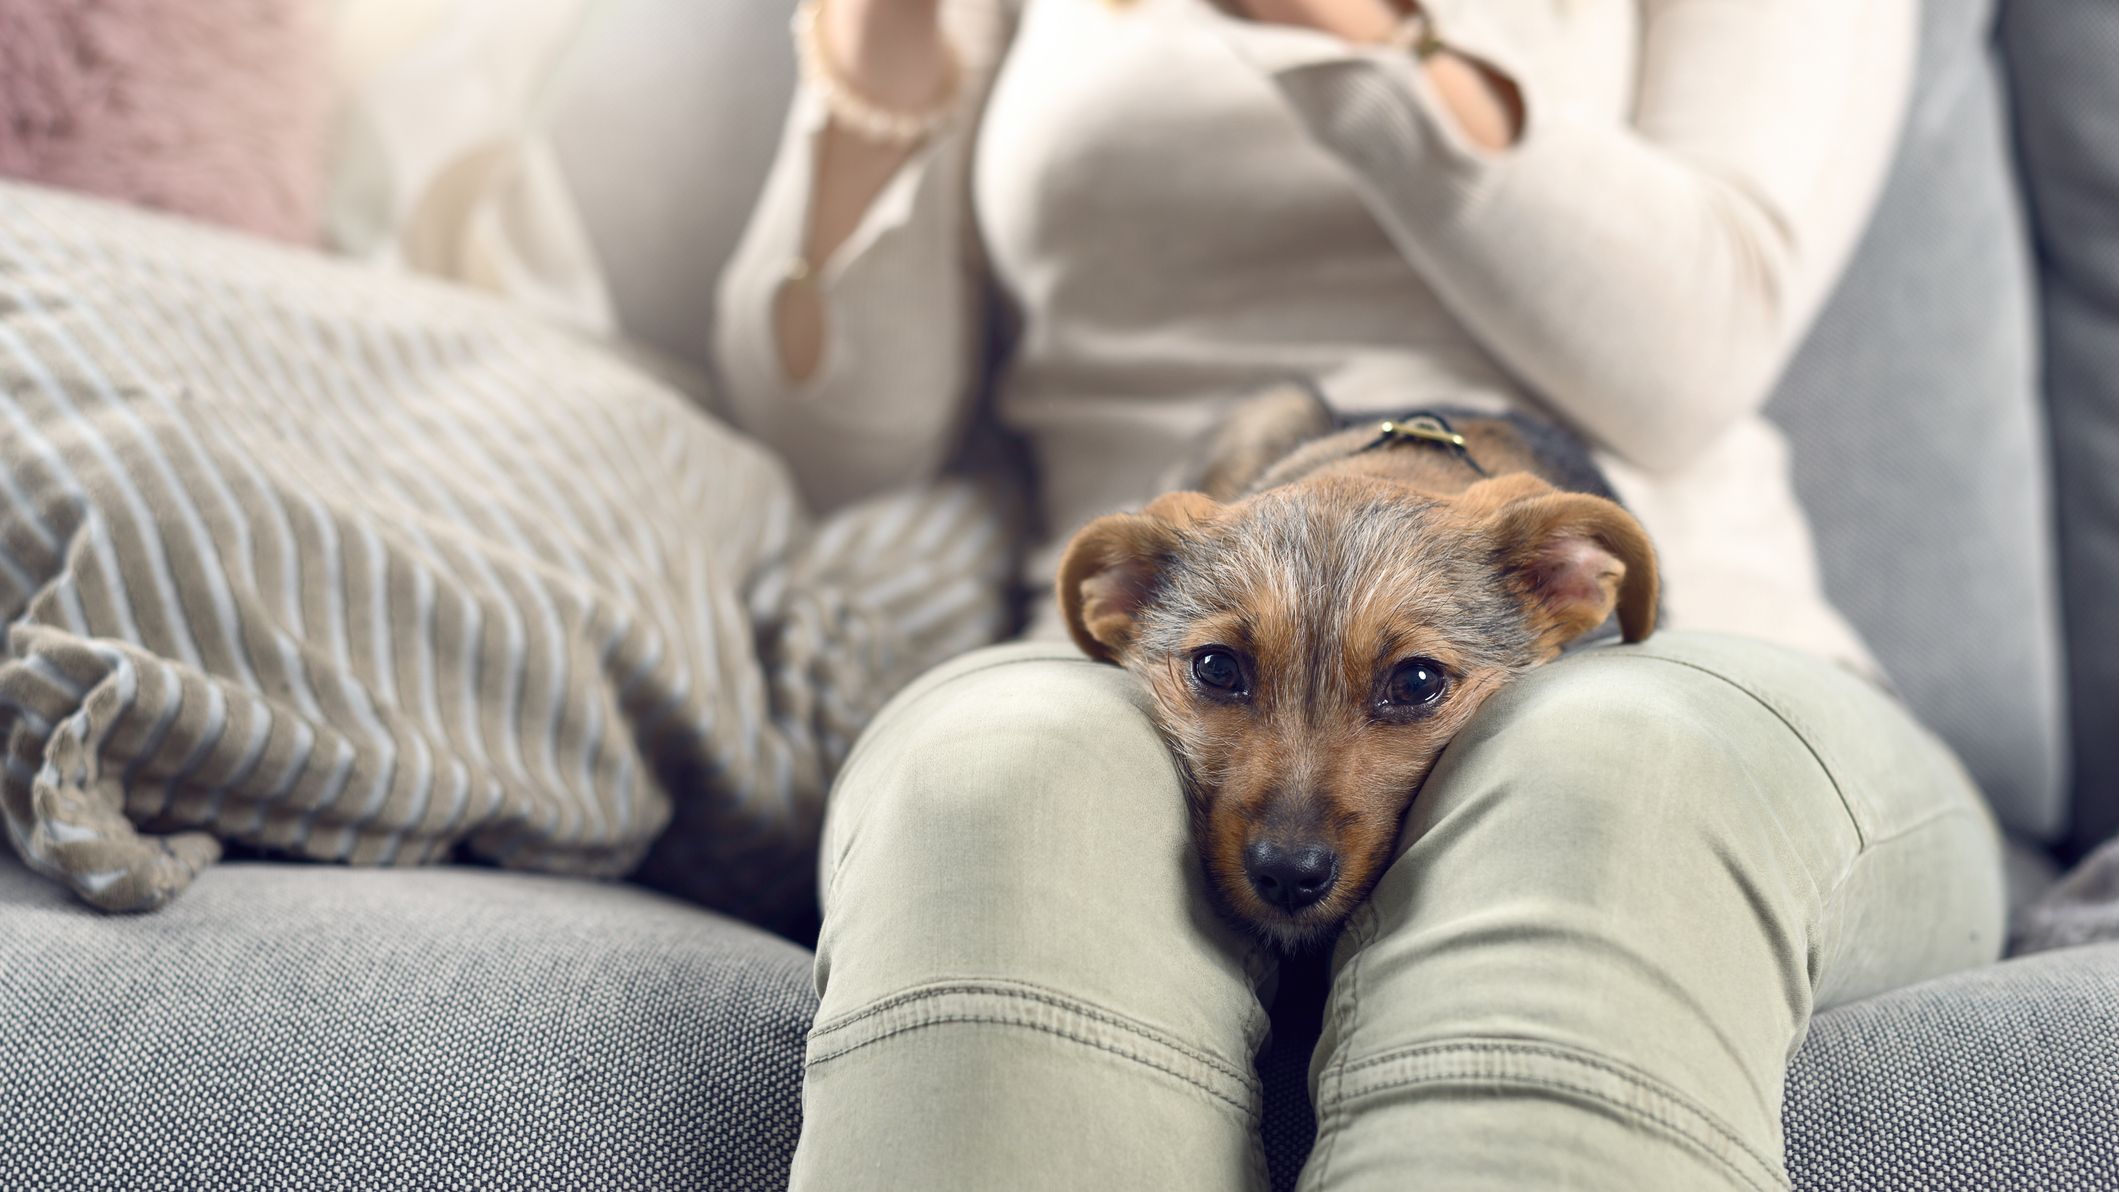 https://hips.hearstapps.com/hmg-prod/images/contented-little-dog-sleeping-on-its-owners-lap-royalty-free-image-641666120-1551114925.jpg?crop=1xw:0.84296xh;center,top